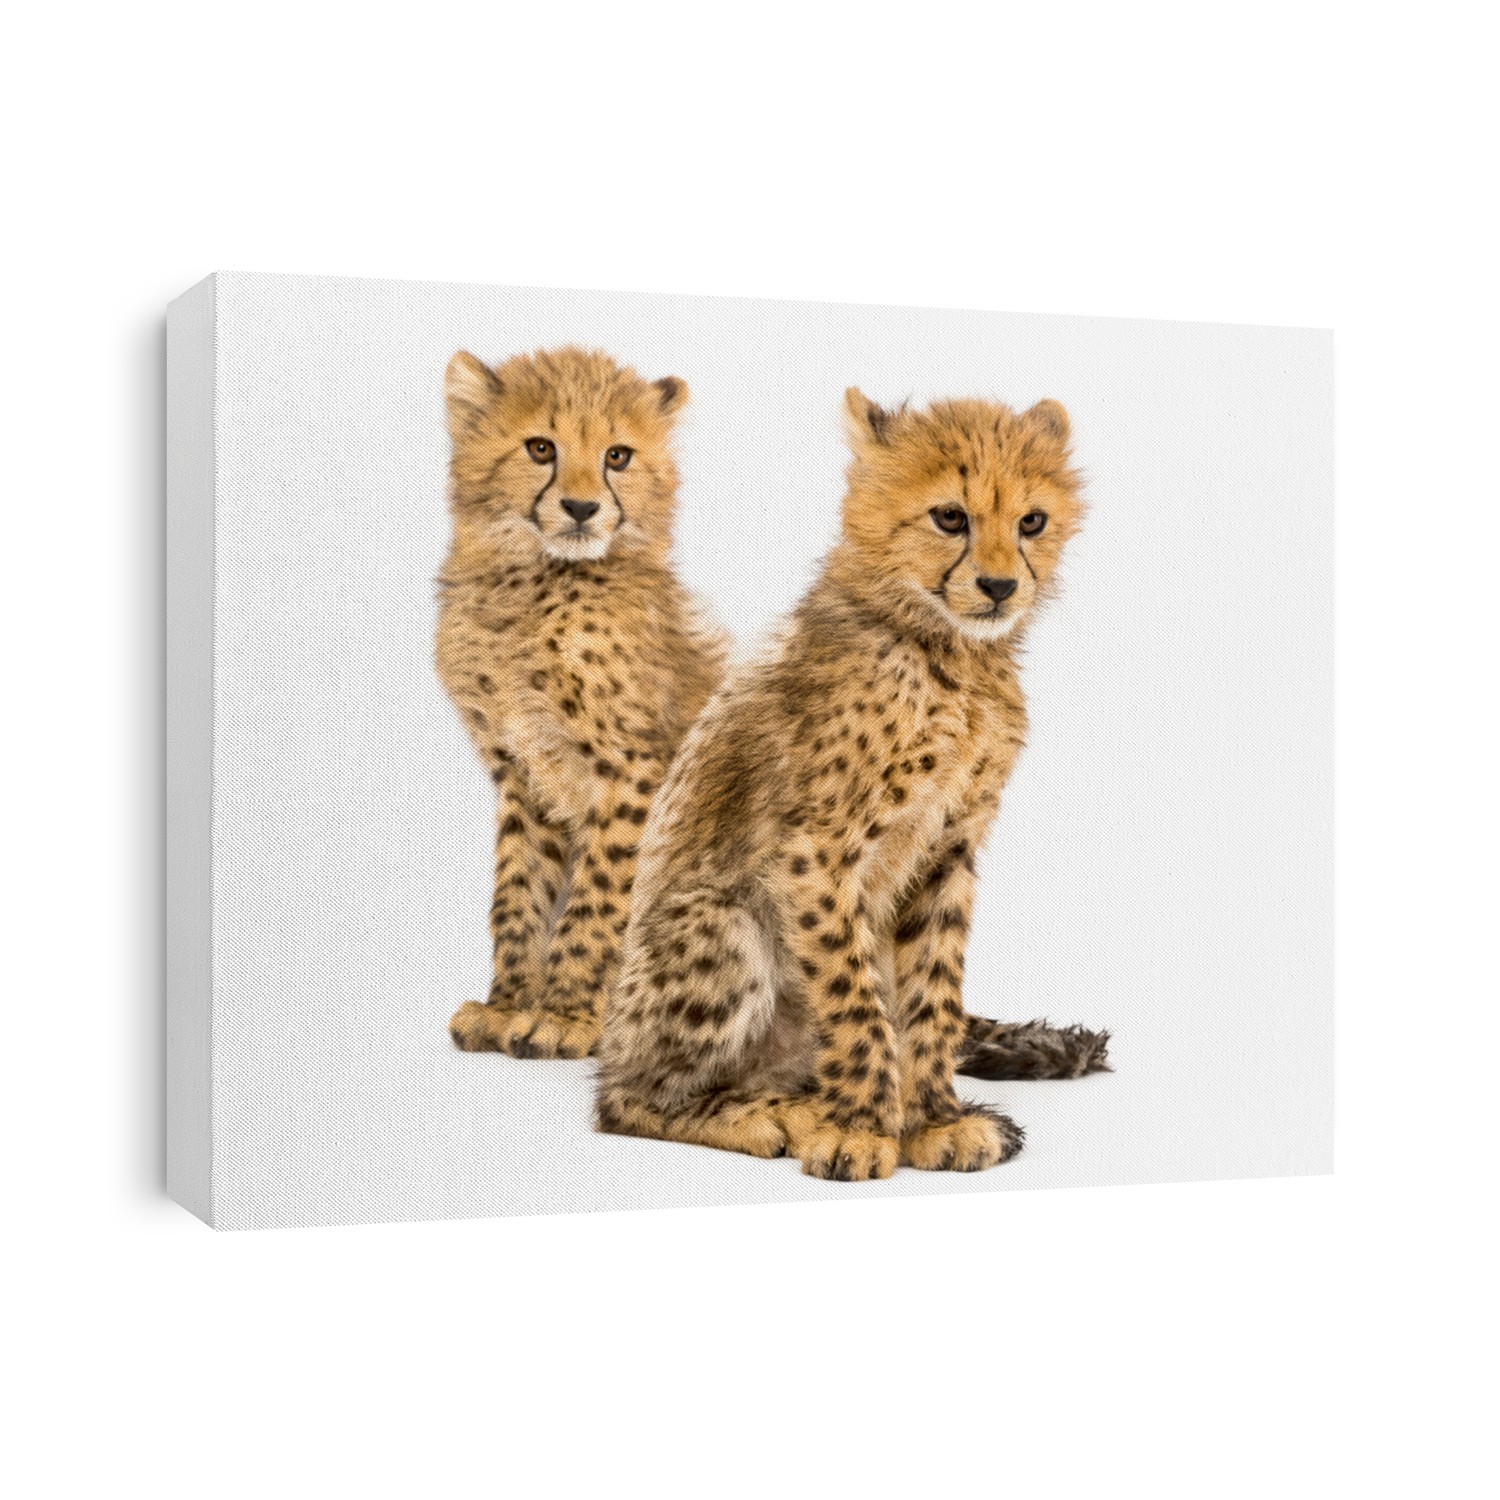 Couple of three months old cheetah cubs, isolated on white